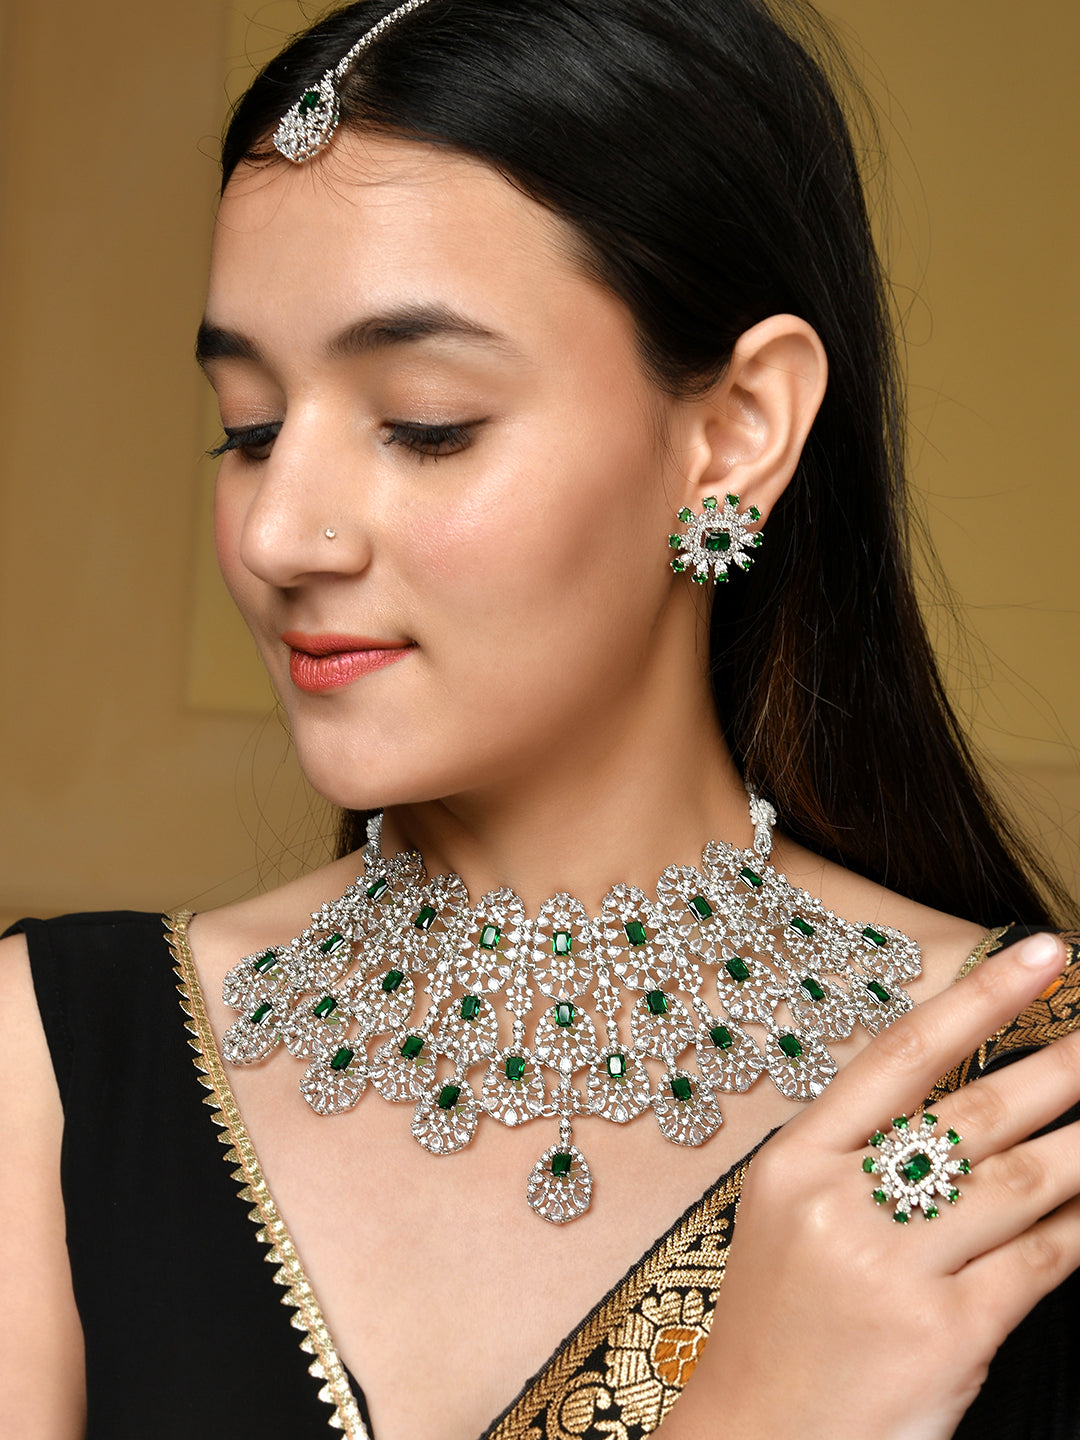 This stunning American Diamond heavy jewellery set with tikkka is the perfect accessory for any woman, bride or girl. With its intricate design and high-quality materials, it will add a touch of elegance and glamour to any outfit. Elevate your style with this beautiful set.